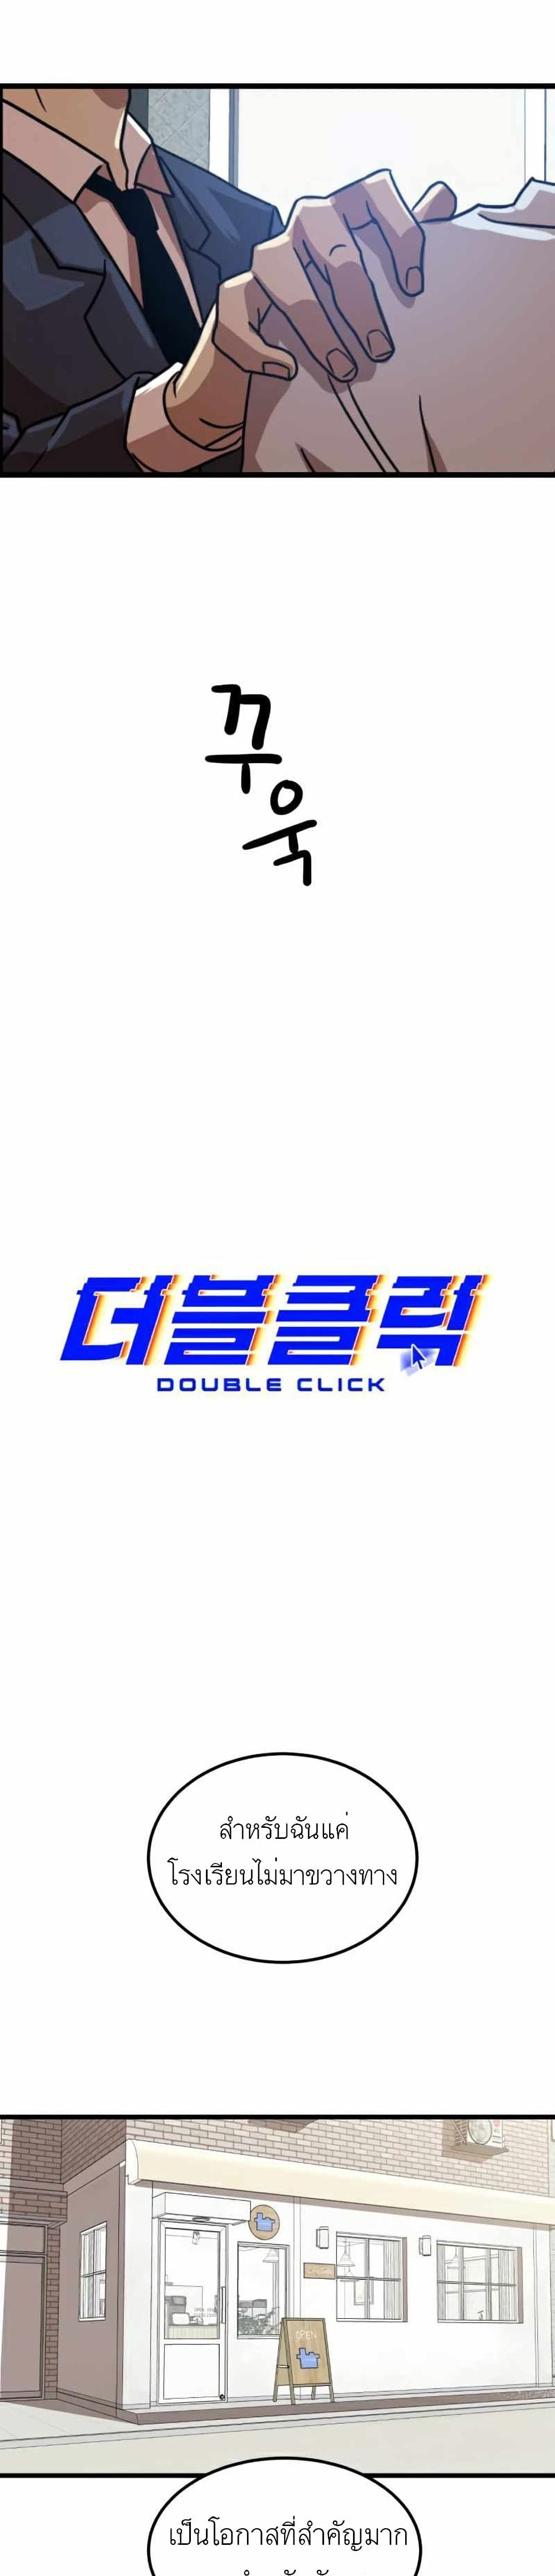 Double Click 38-38